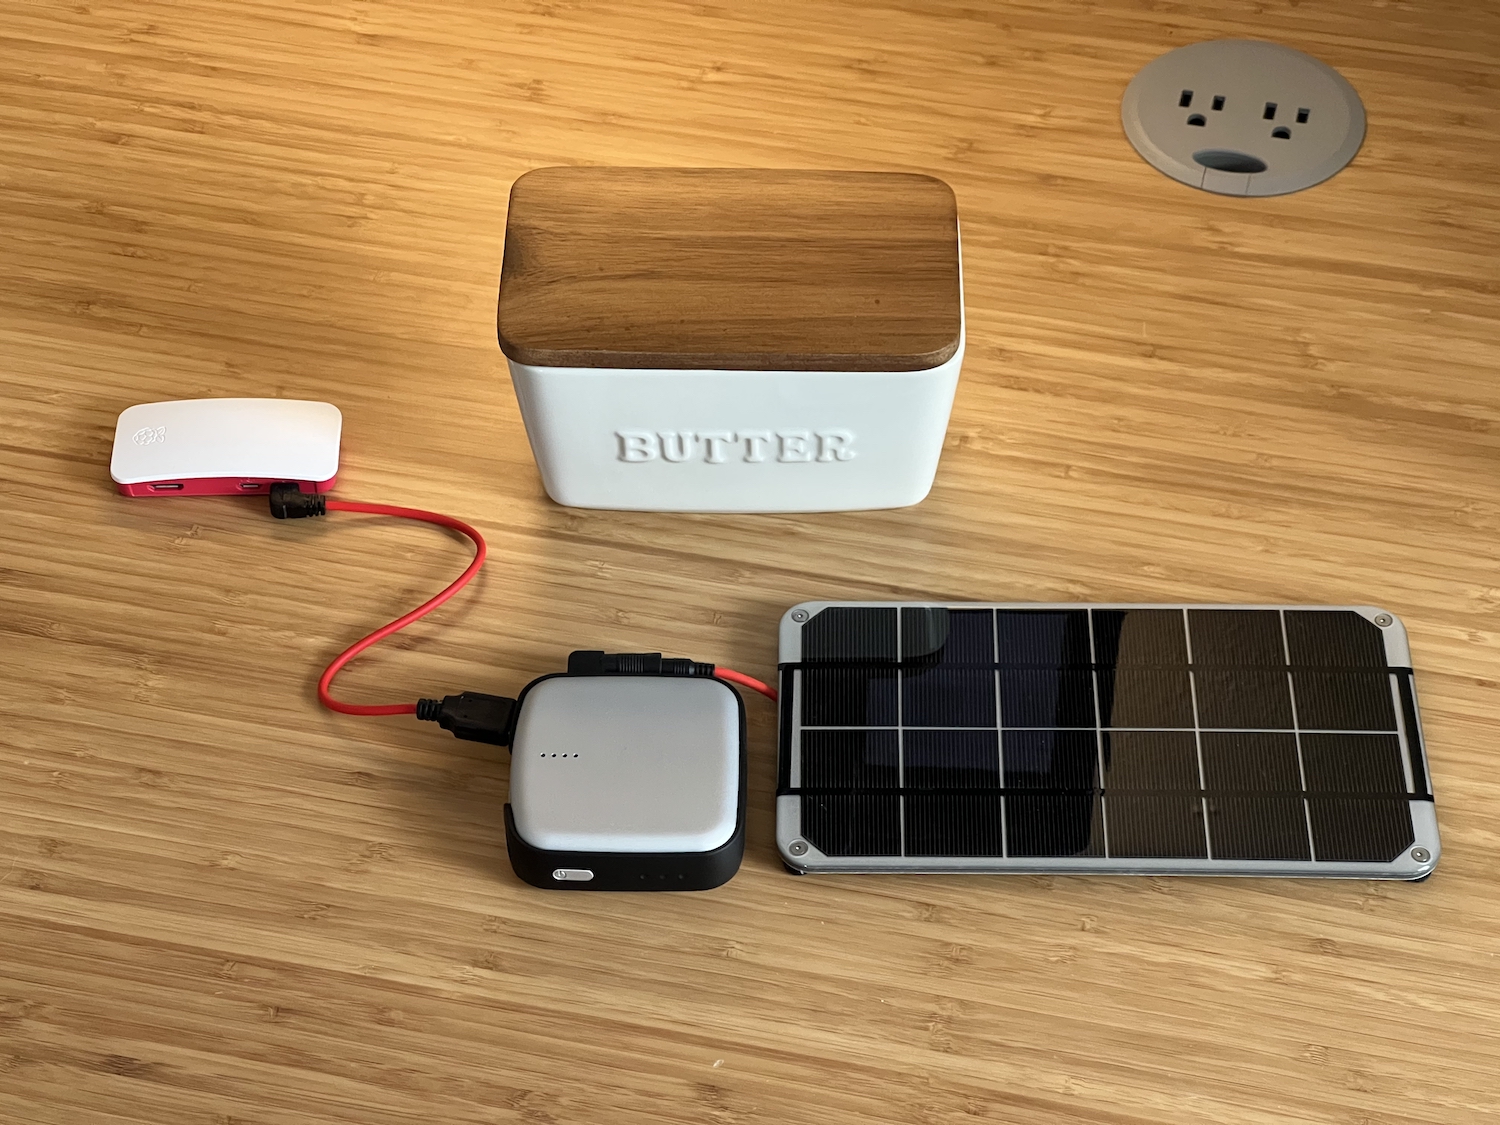 A Butter Box: A Raspberry Pi Zero W 2 plugged into a battery and solar panel.